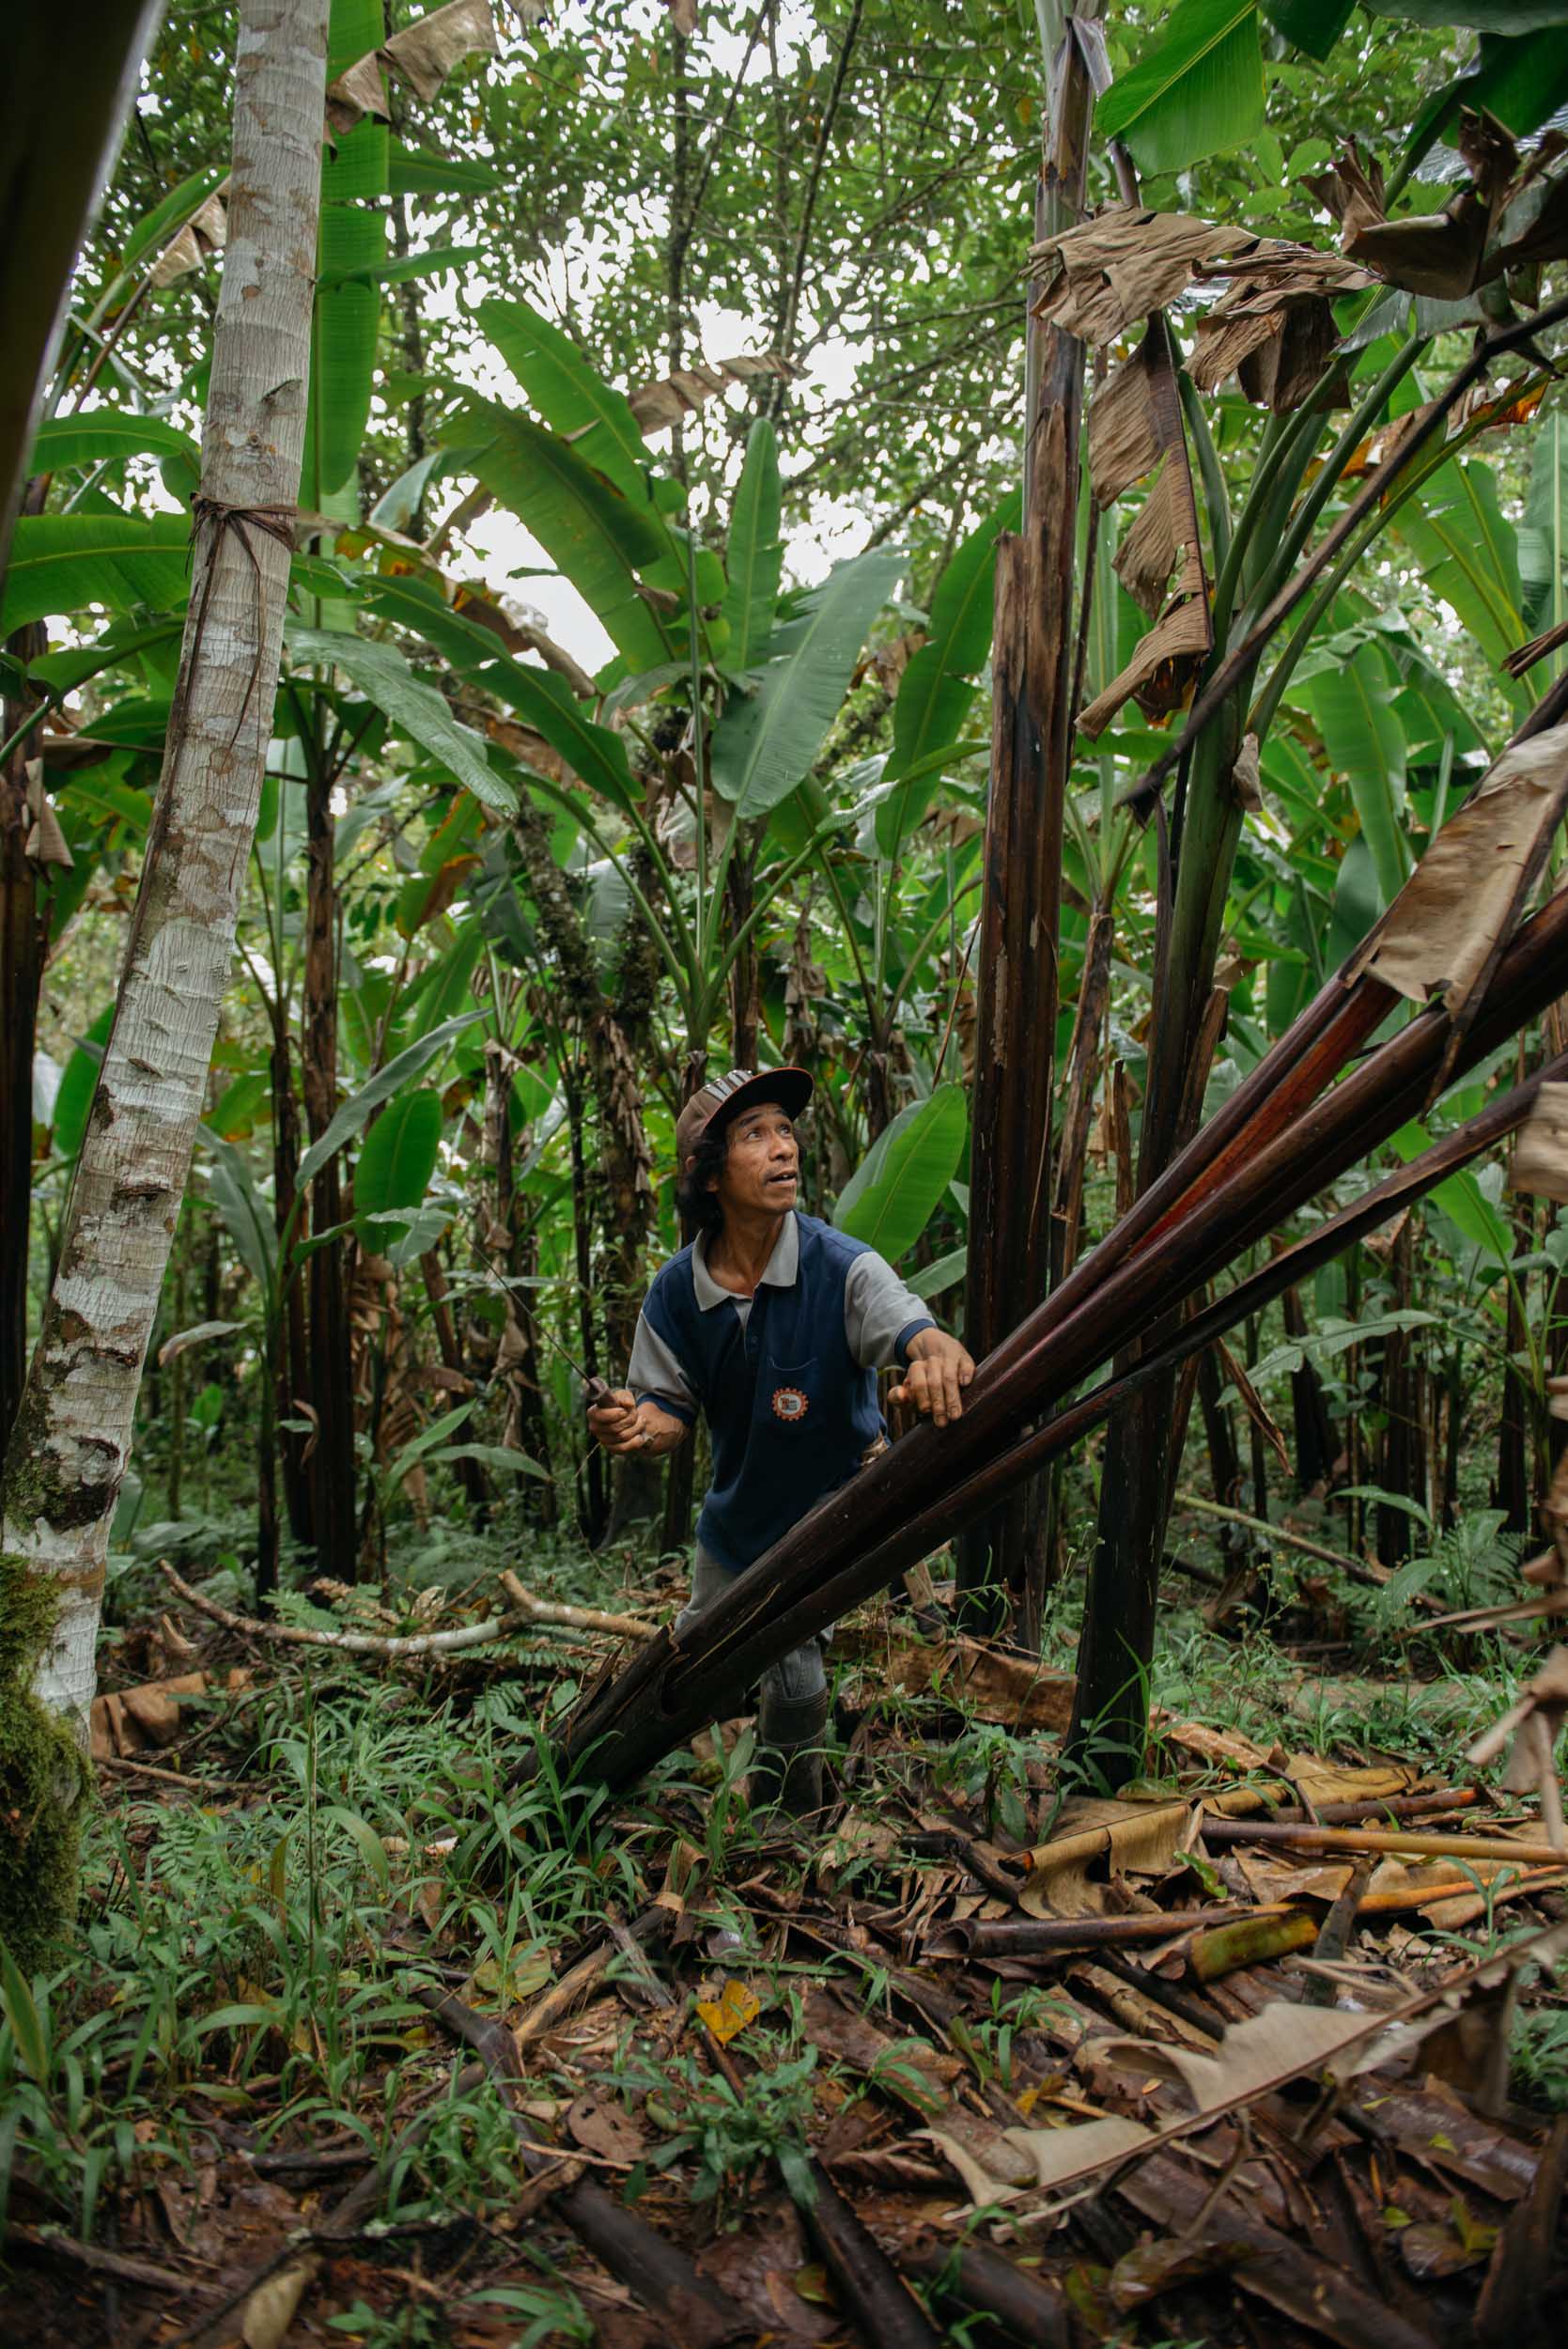  The process of Hinabol weaving starts with the abaca. A30-minute hike from the community, hectares of abaca trees were kept in best condition by the rainforest’s excellent soil and the Higaonon’s indigenous ways of sowing trees. 